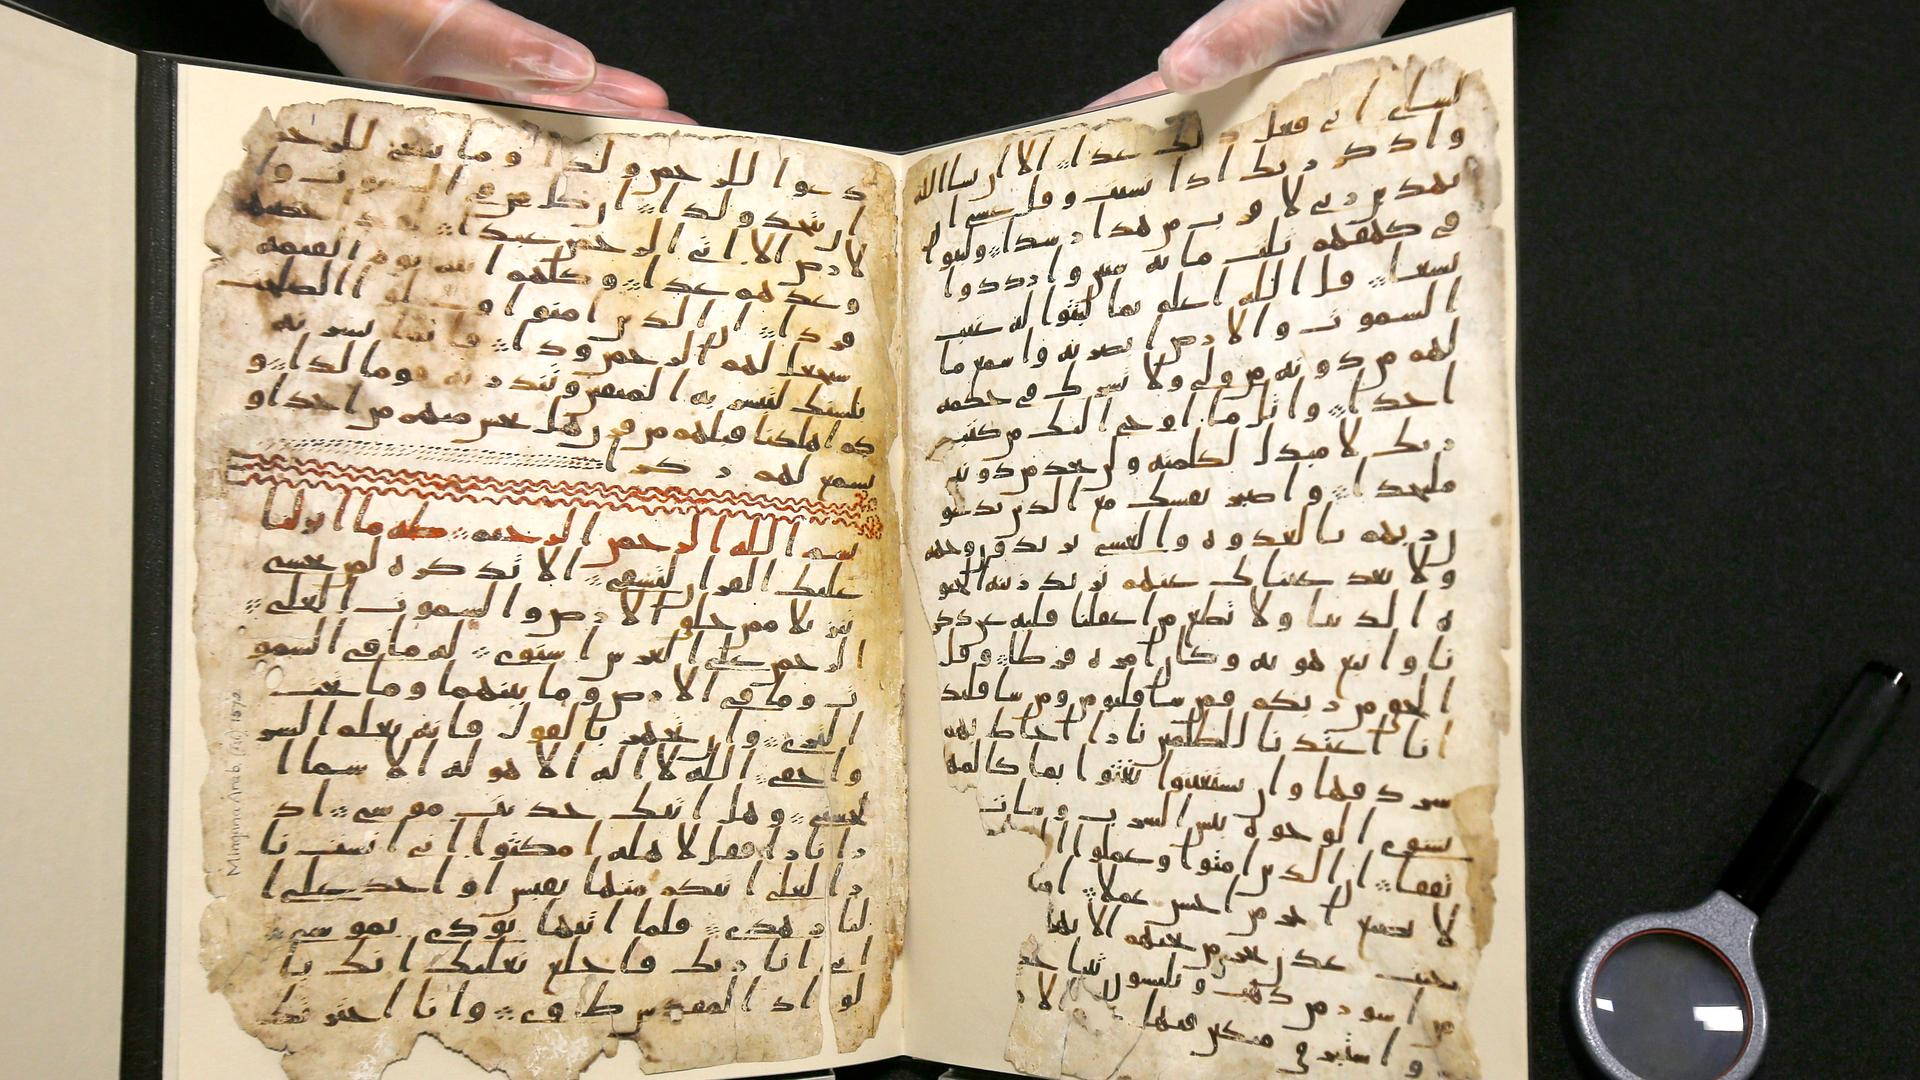 This Quranic manuscript found in the library of the University of Birmingham is one of the oldest surviving copies of the Islamic text in the world. Radiocarbon dating indicated that the parchment is around 1,370 years old.